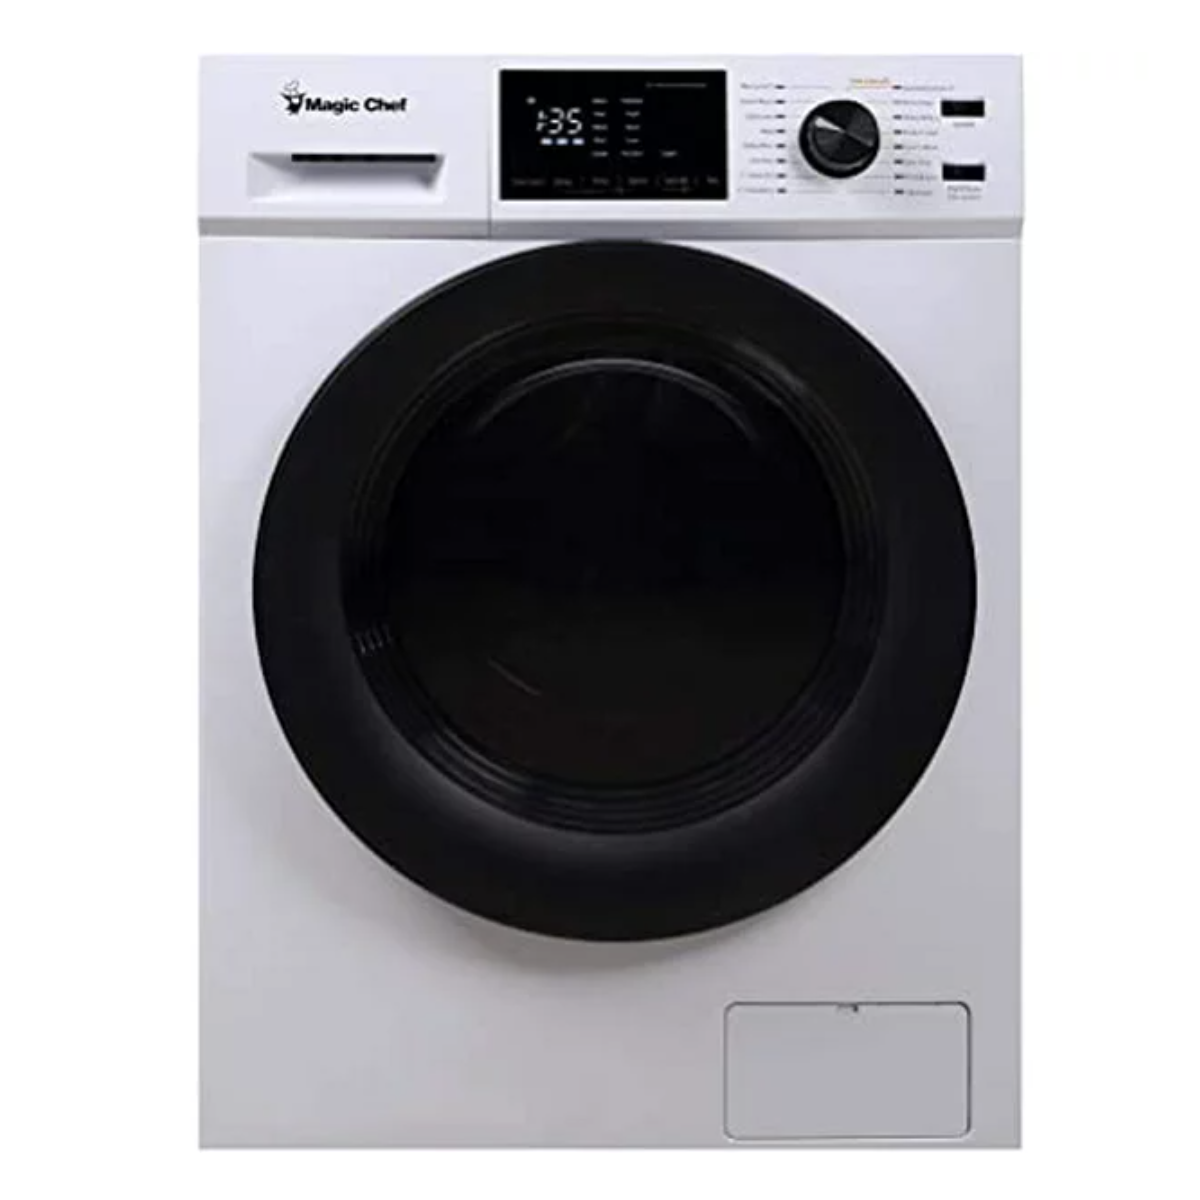 Magic Chef - 2.7 Cu. Ft. Electric All-in-One Washer and Ventless Dryer Combo